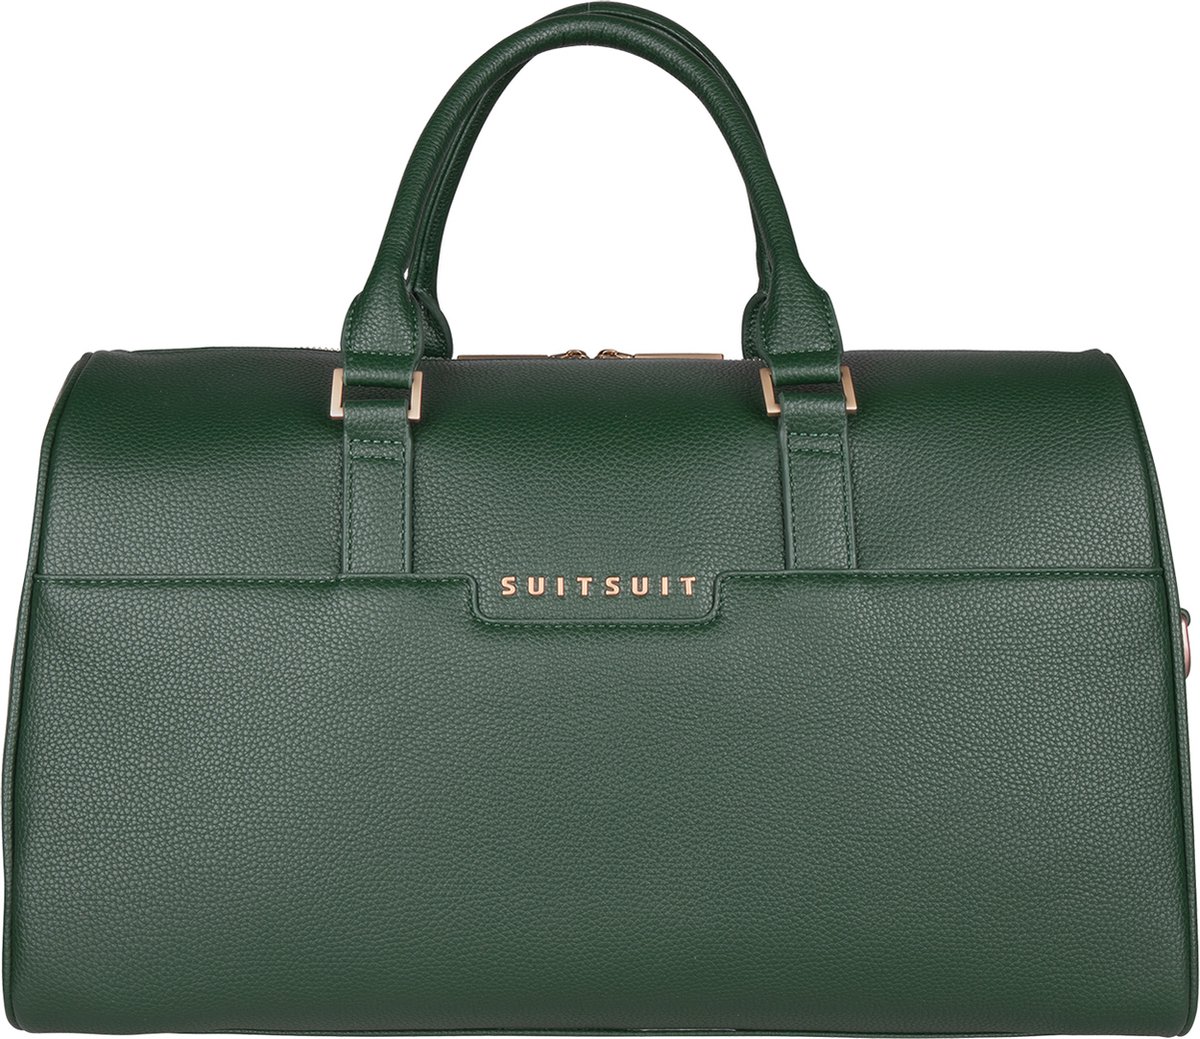 SUITSUIT - Fab Seventies Classic - Beetle Green - Leisure Bag